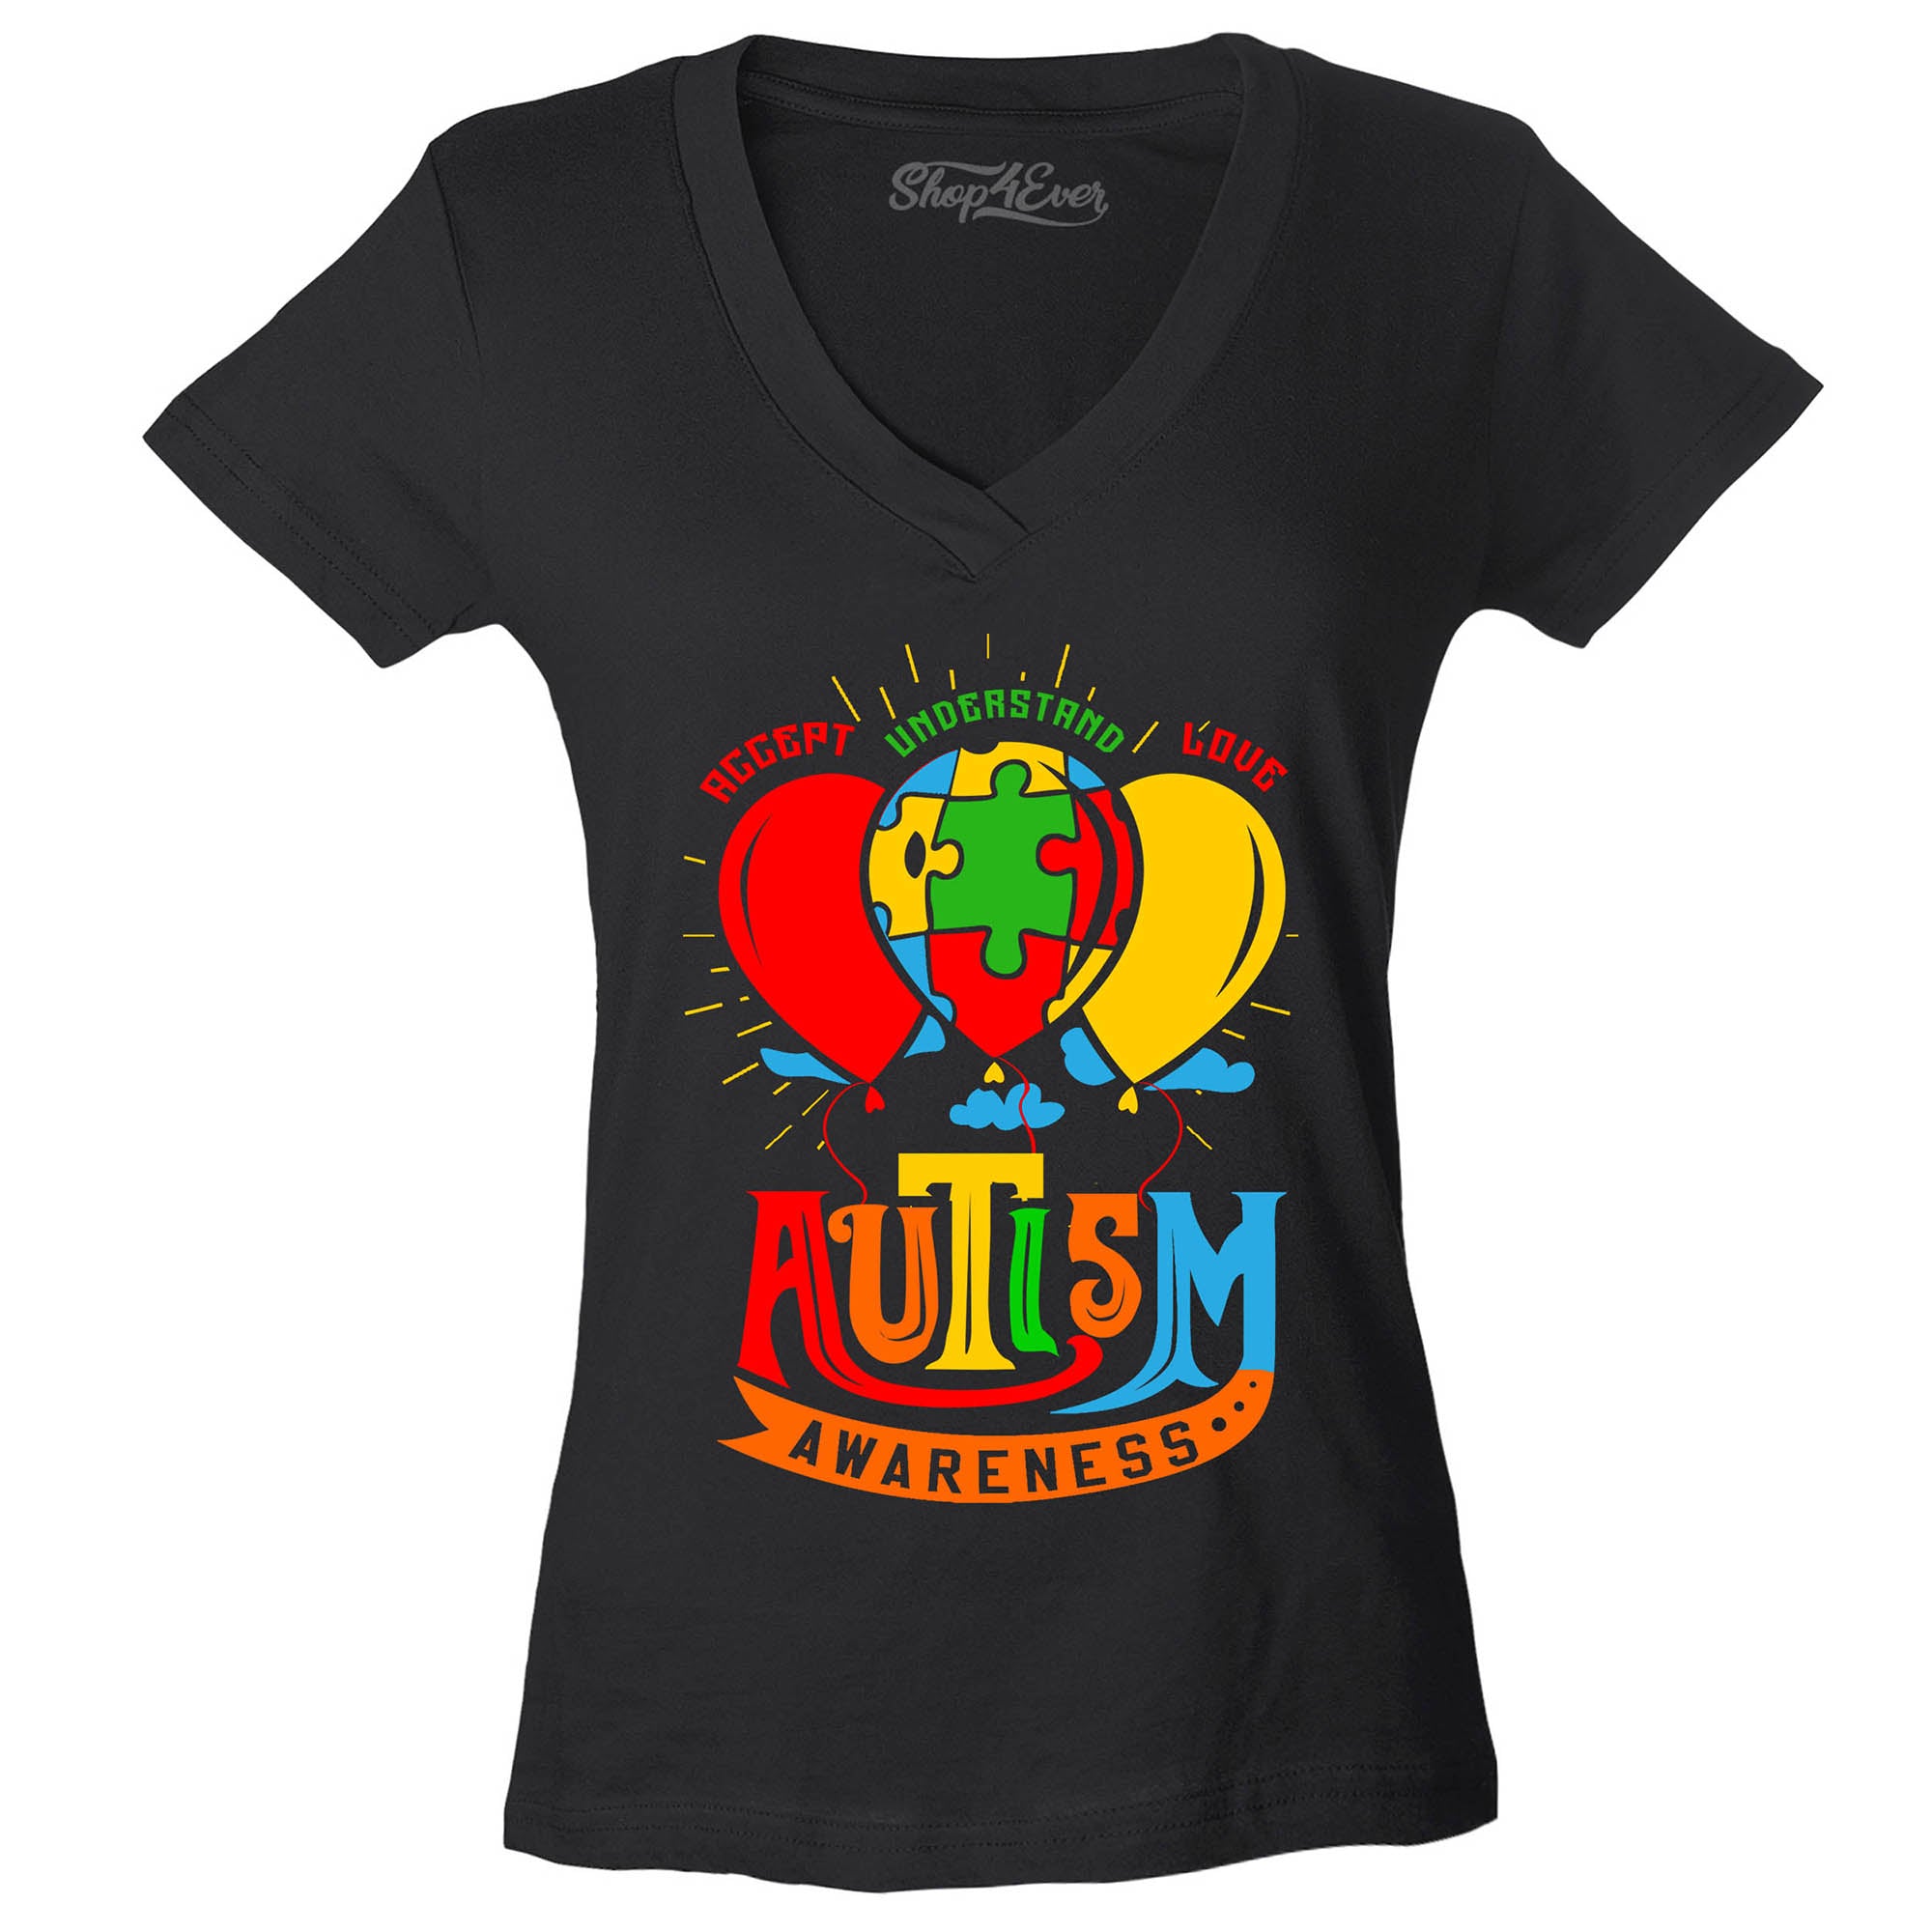 Autism Awareness with Balloons Women's V-Neck T-Shirt Slim Fit